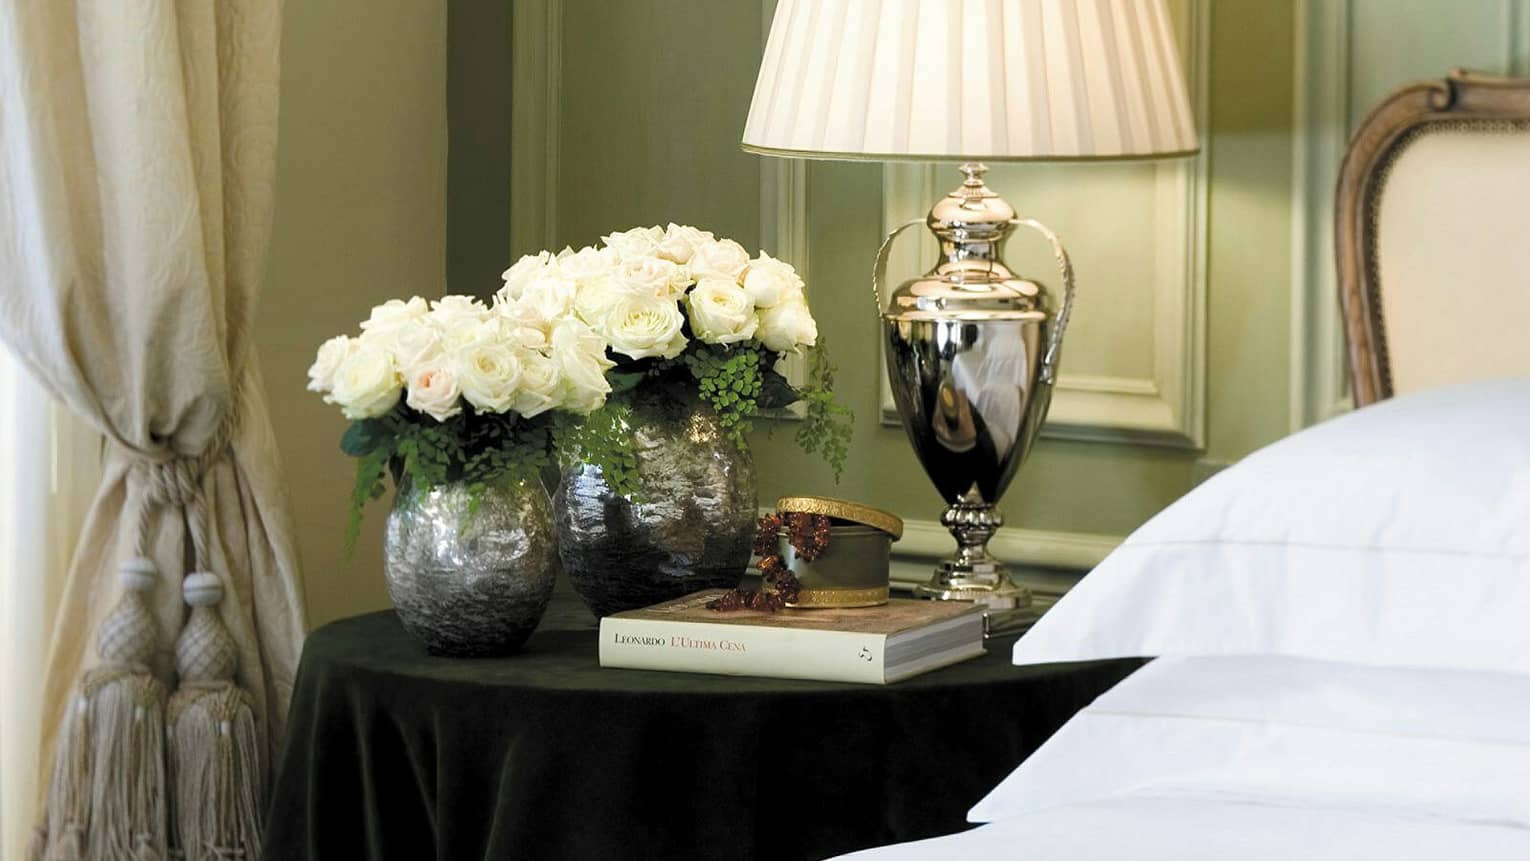 Superior Room silver lamp, vases with white roses, book on nightstand